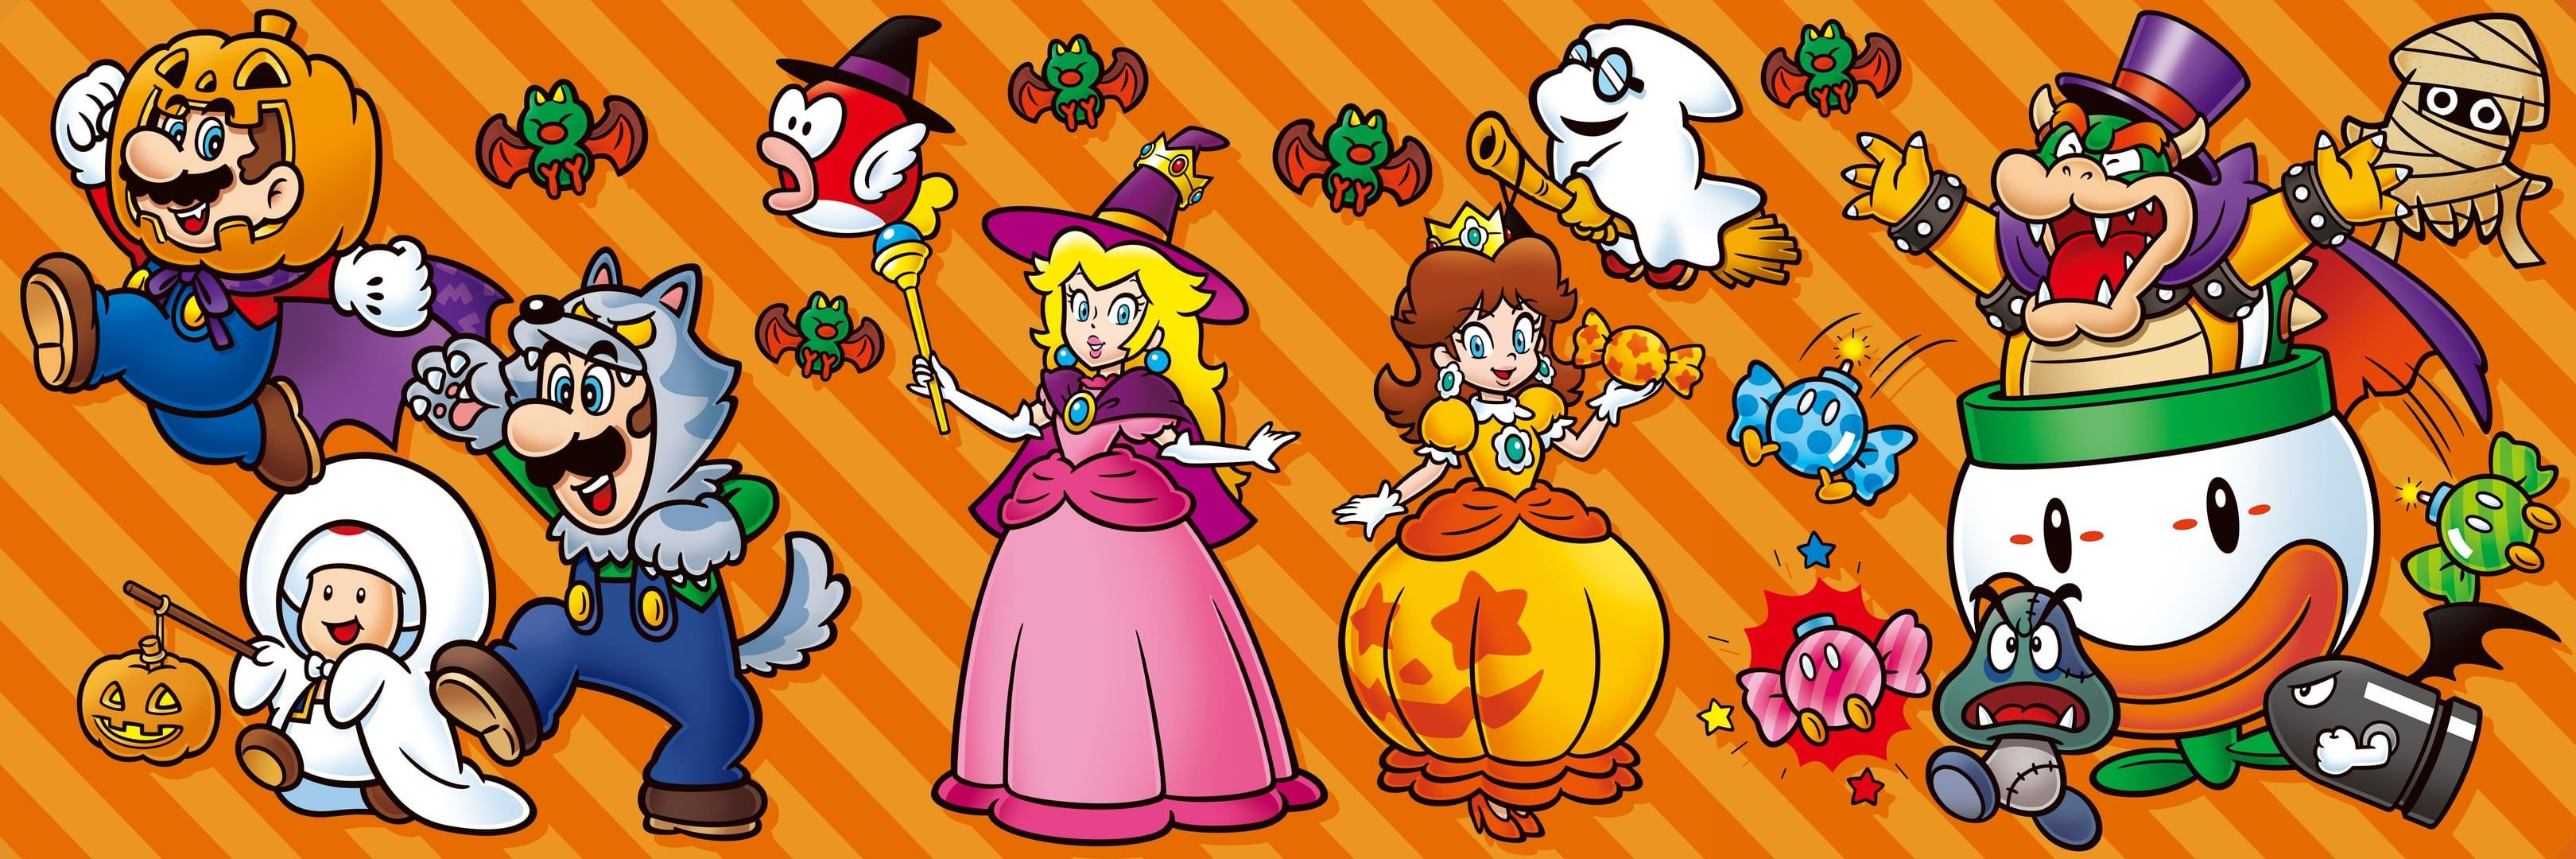 Nintendo shares special of Mario Halloween | The GoNintendo Archives | GoNintendo